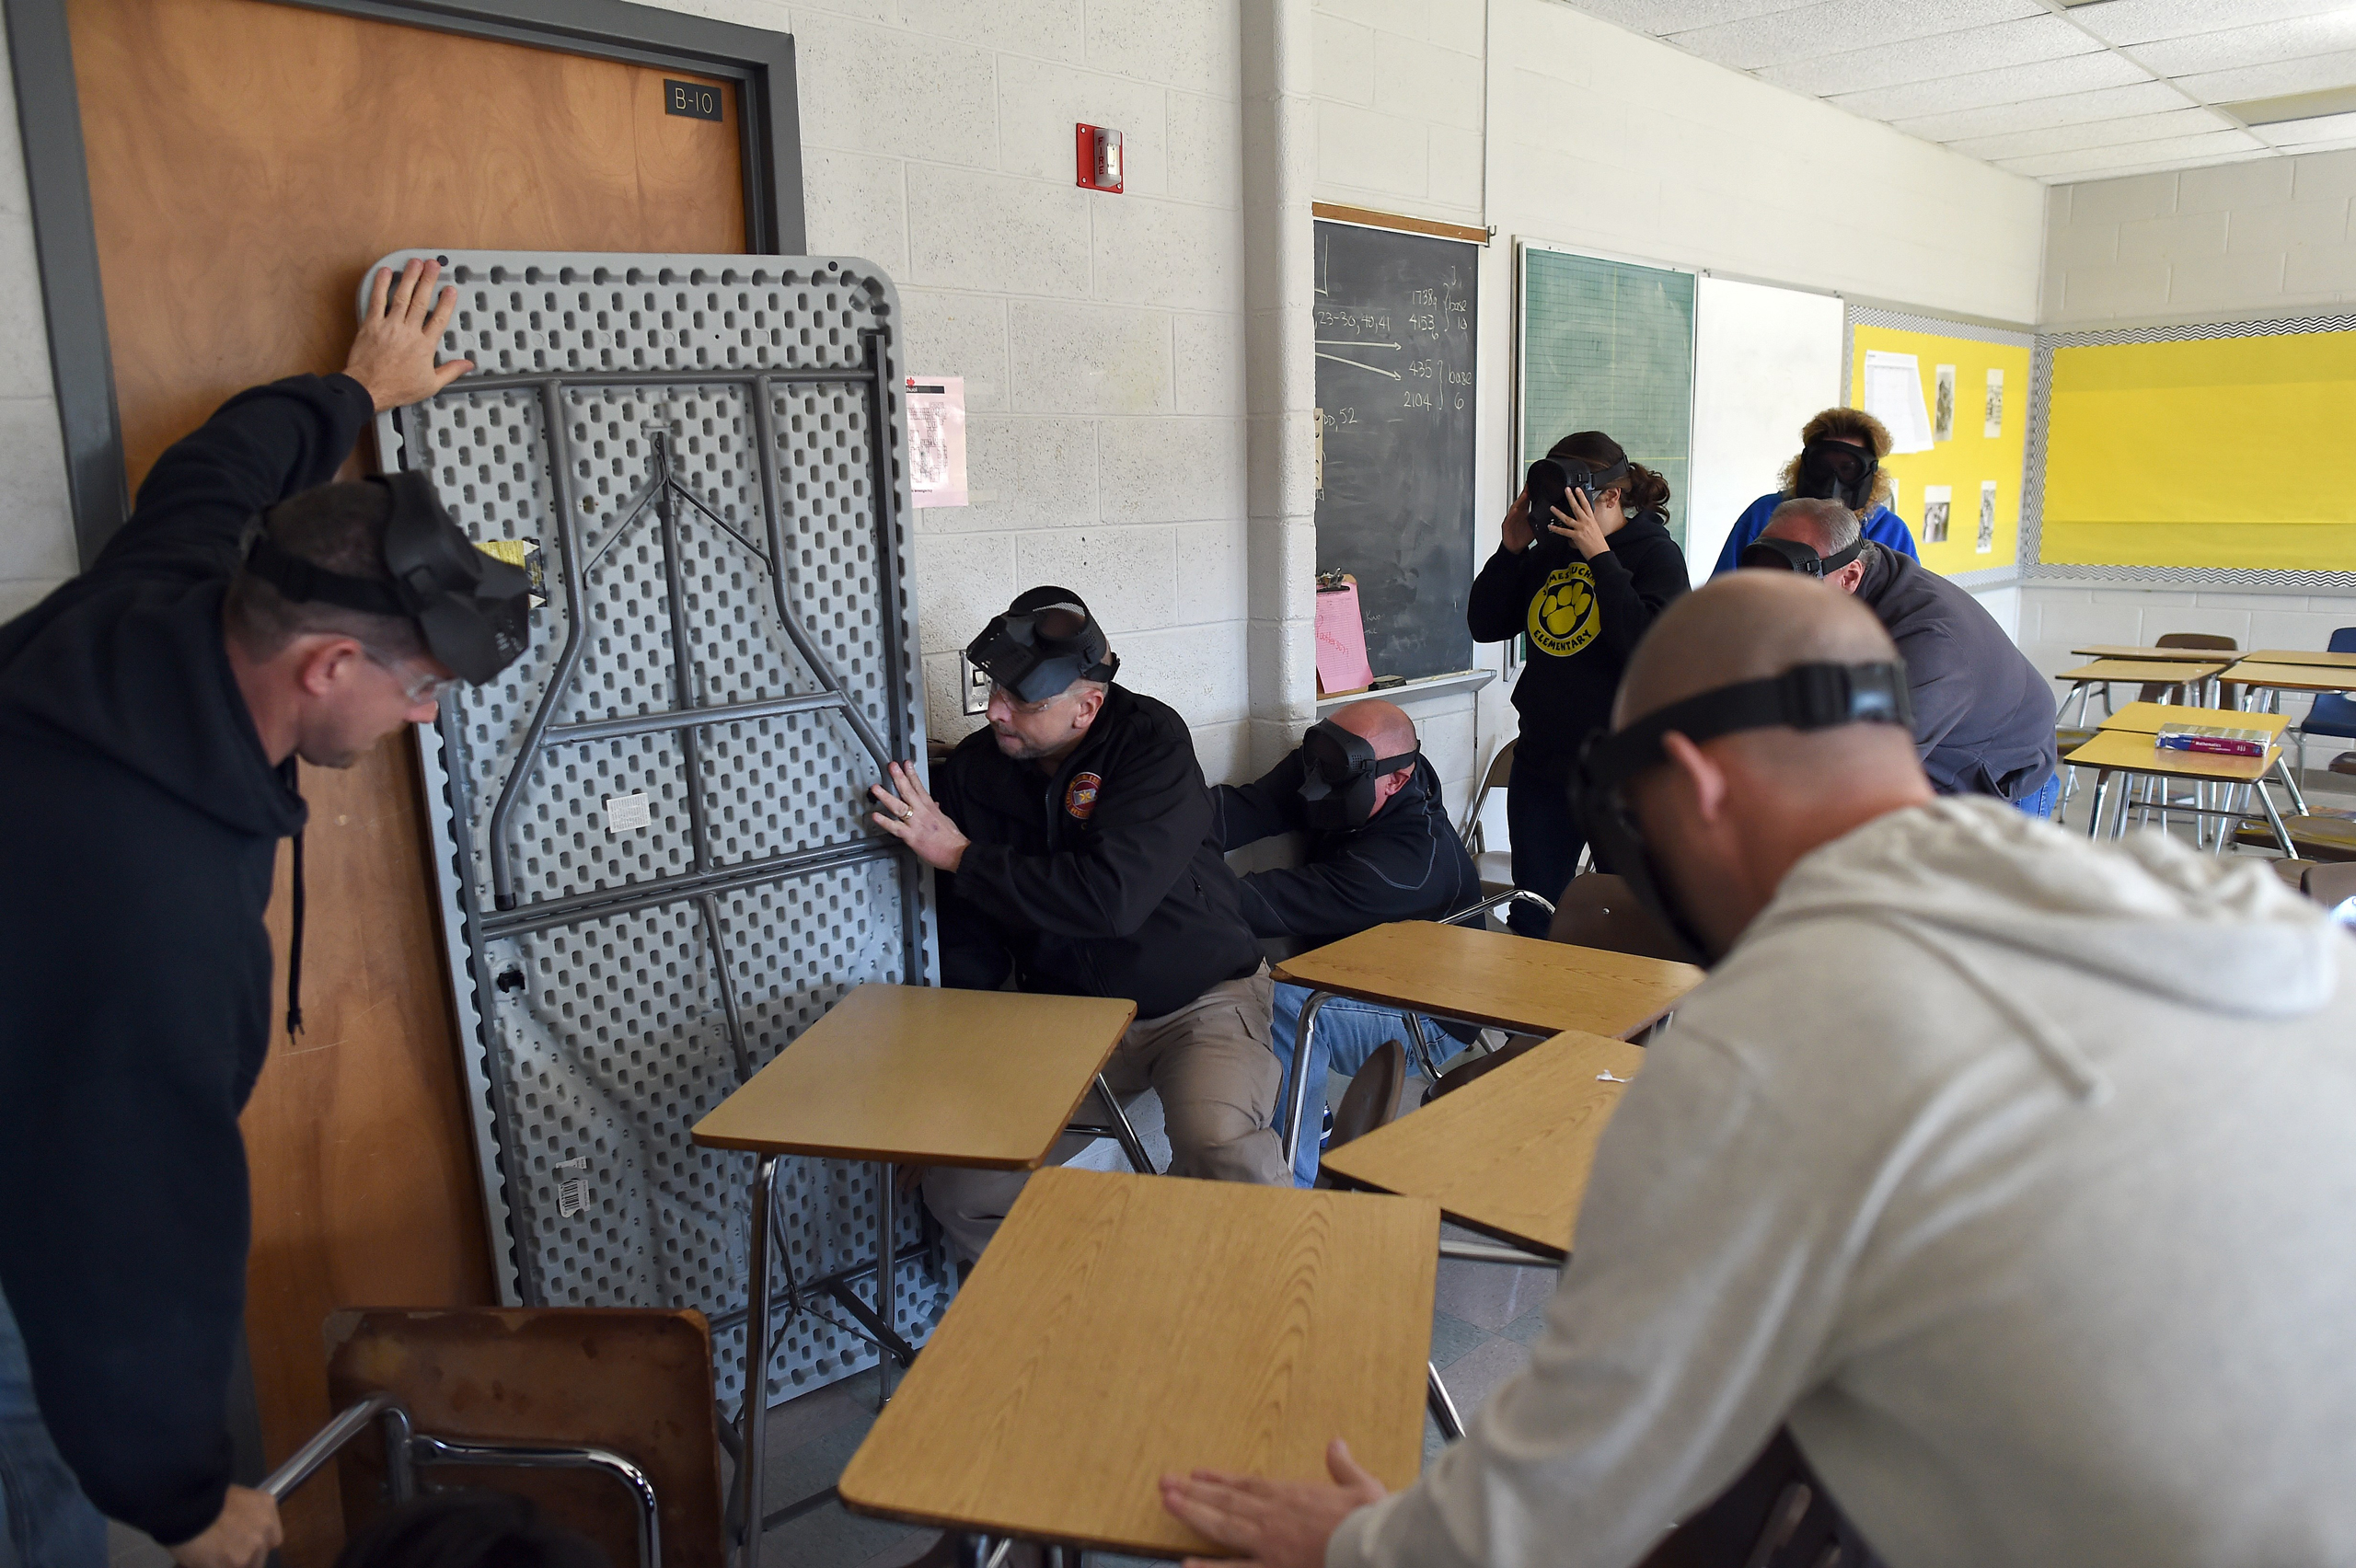 Participants barricade a door of a classroom to block an "active shooter" during ALICE (Alert, Lockdown, Inform, Counter and Evacuate) training at the Harry S. Truman High School in Levittown, Pennsylvania, on Nov. 3, 2015. (Jewel Samad—AFP/Getty Images)